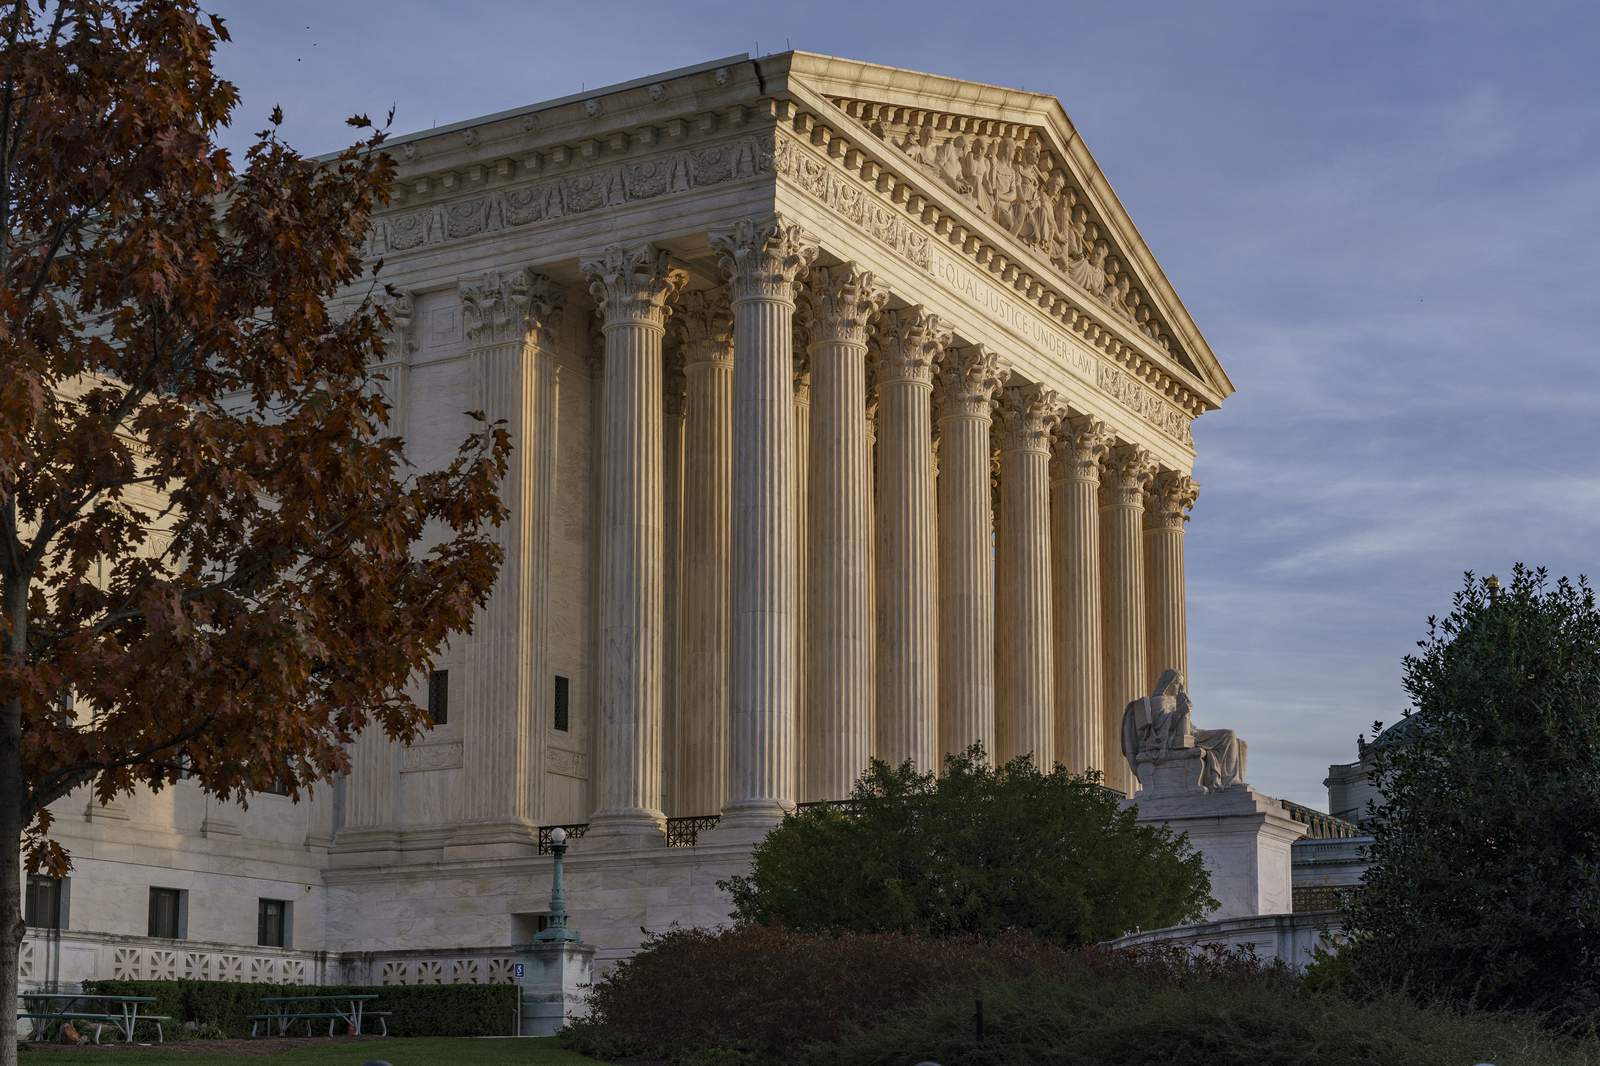 Justices order review of Colorado, New Jersey worship limits